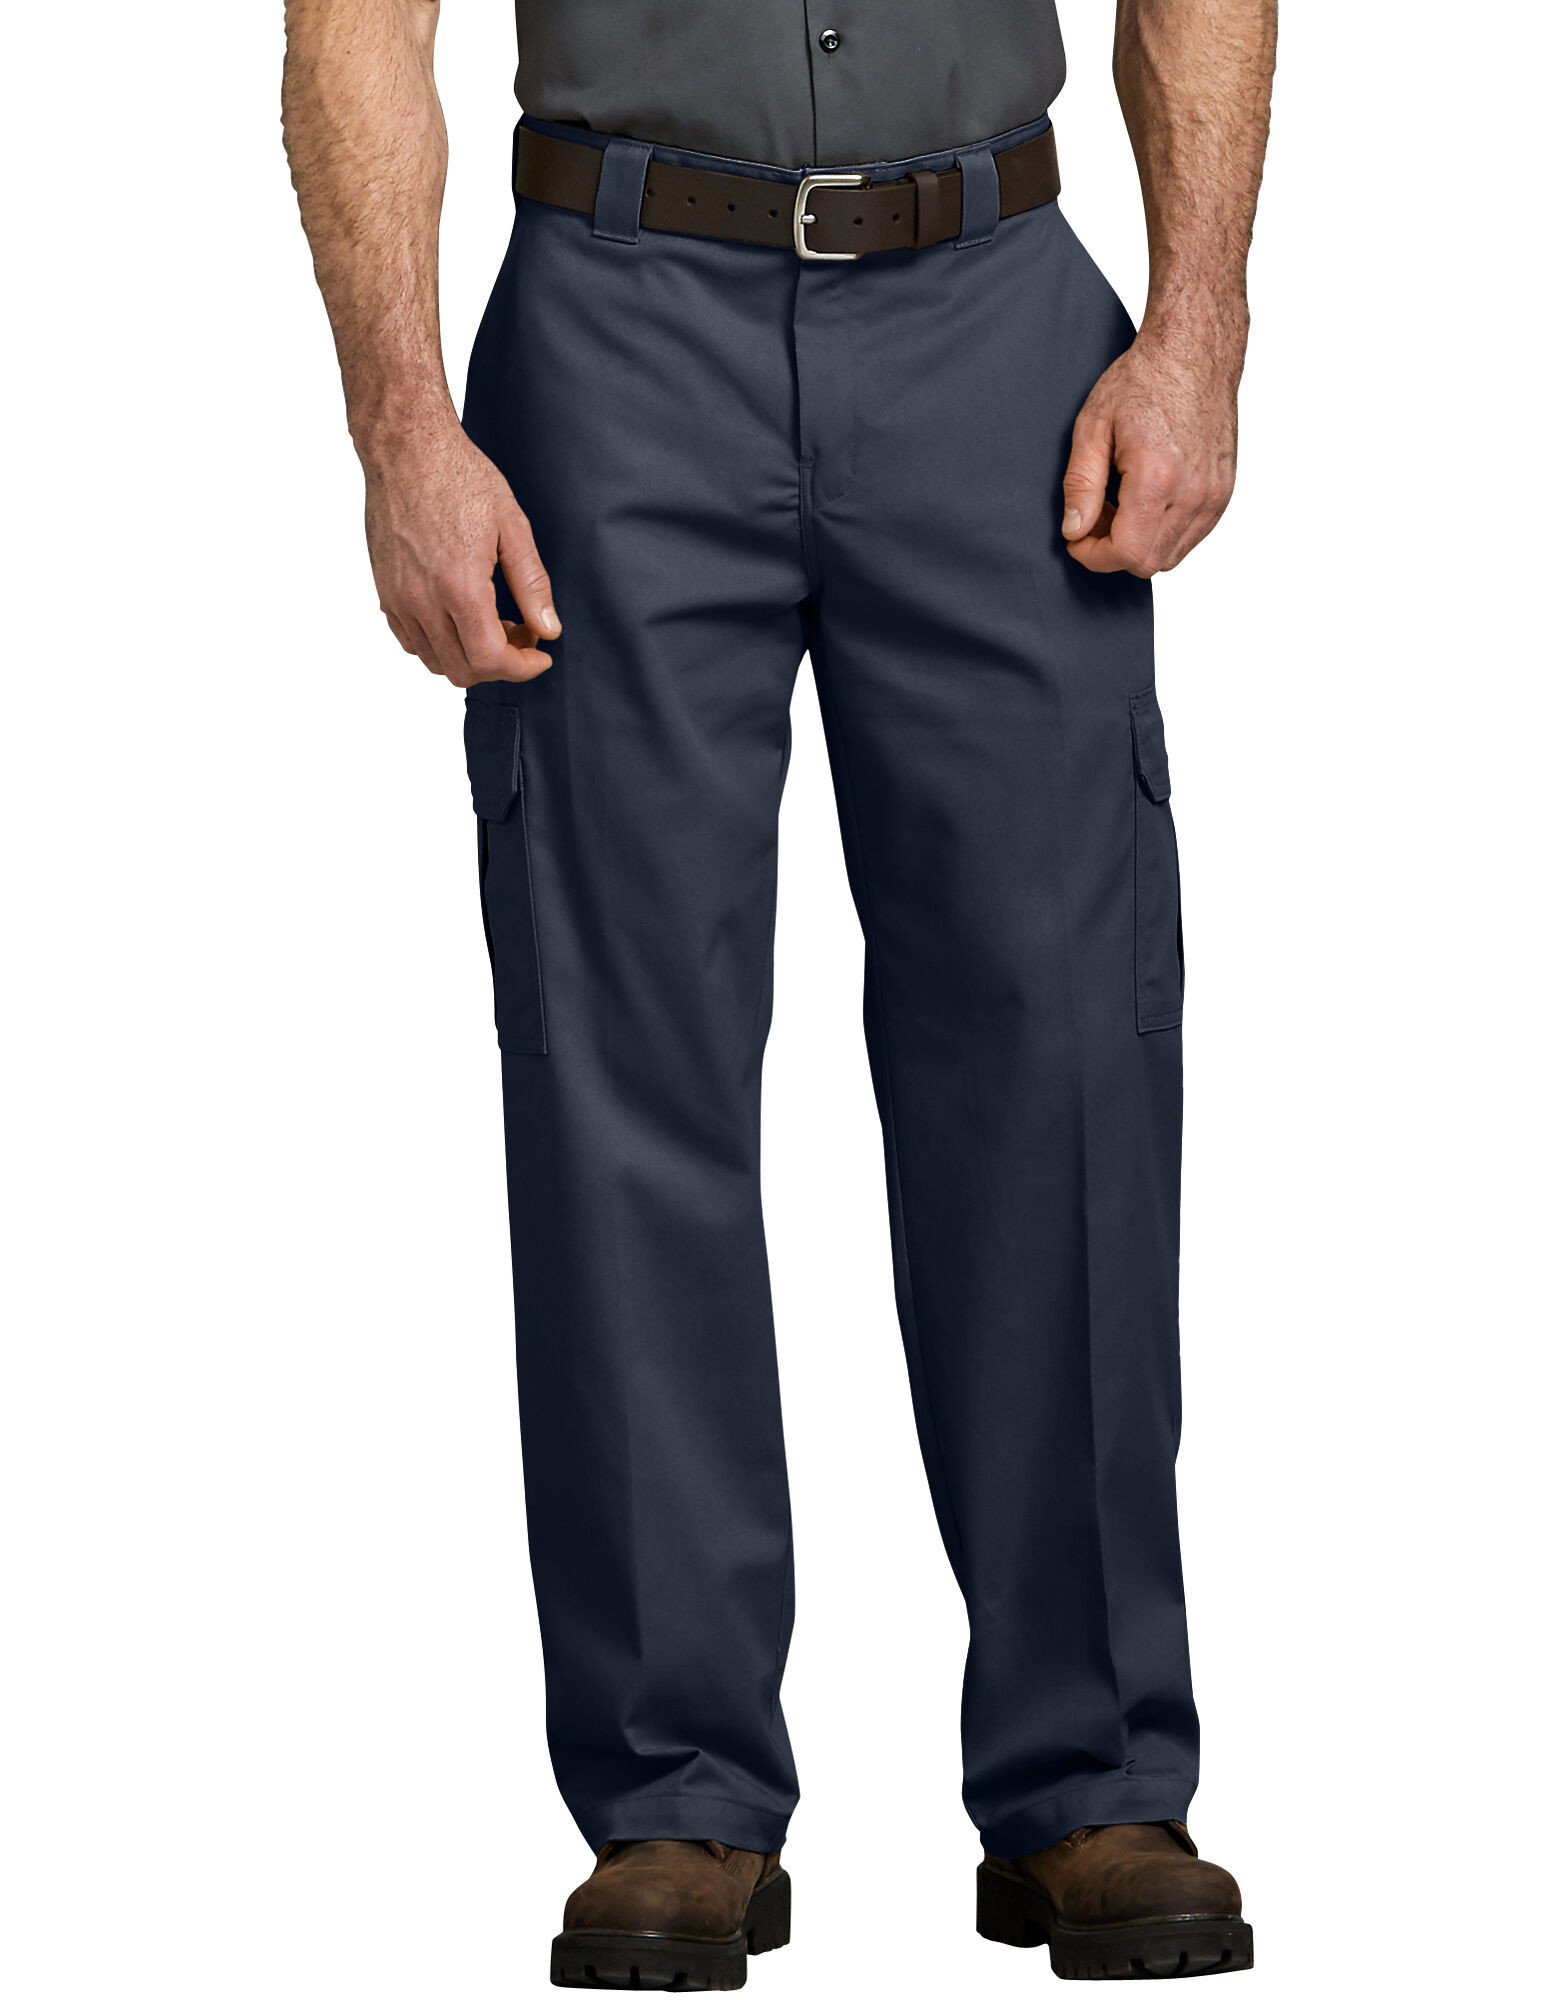 Casual Khaki Pants For Men | Relaxed Fit Cargo | Dickies